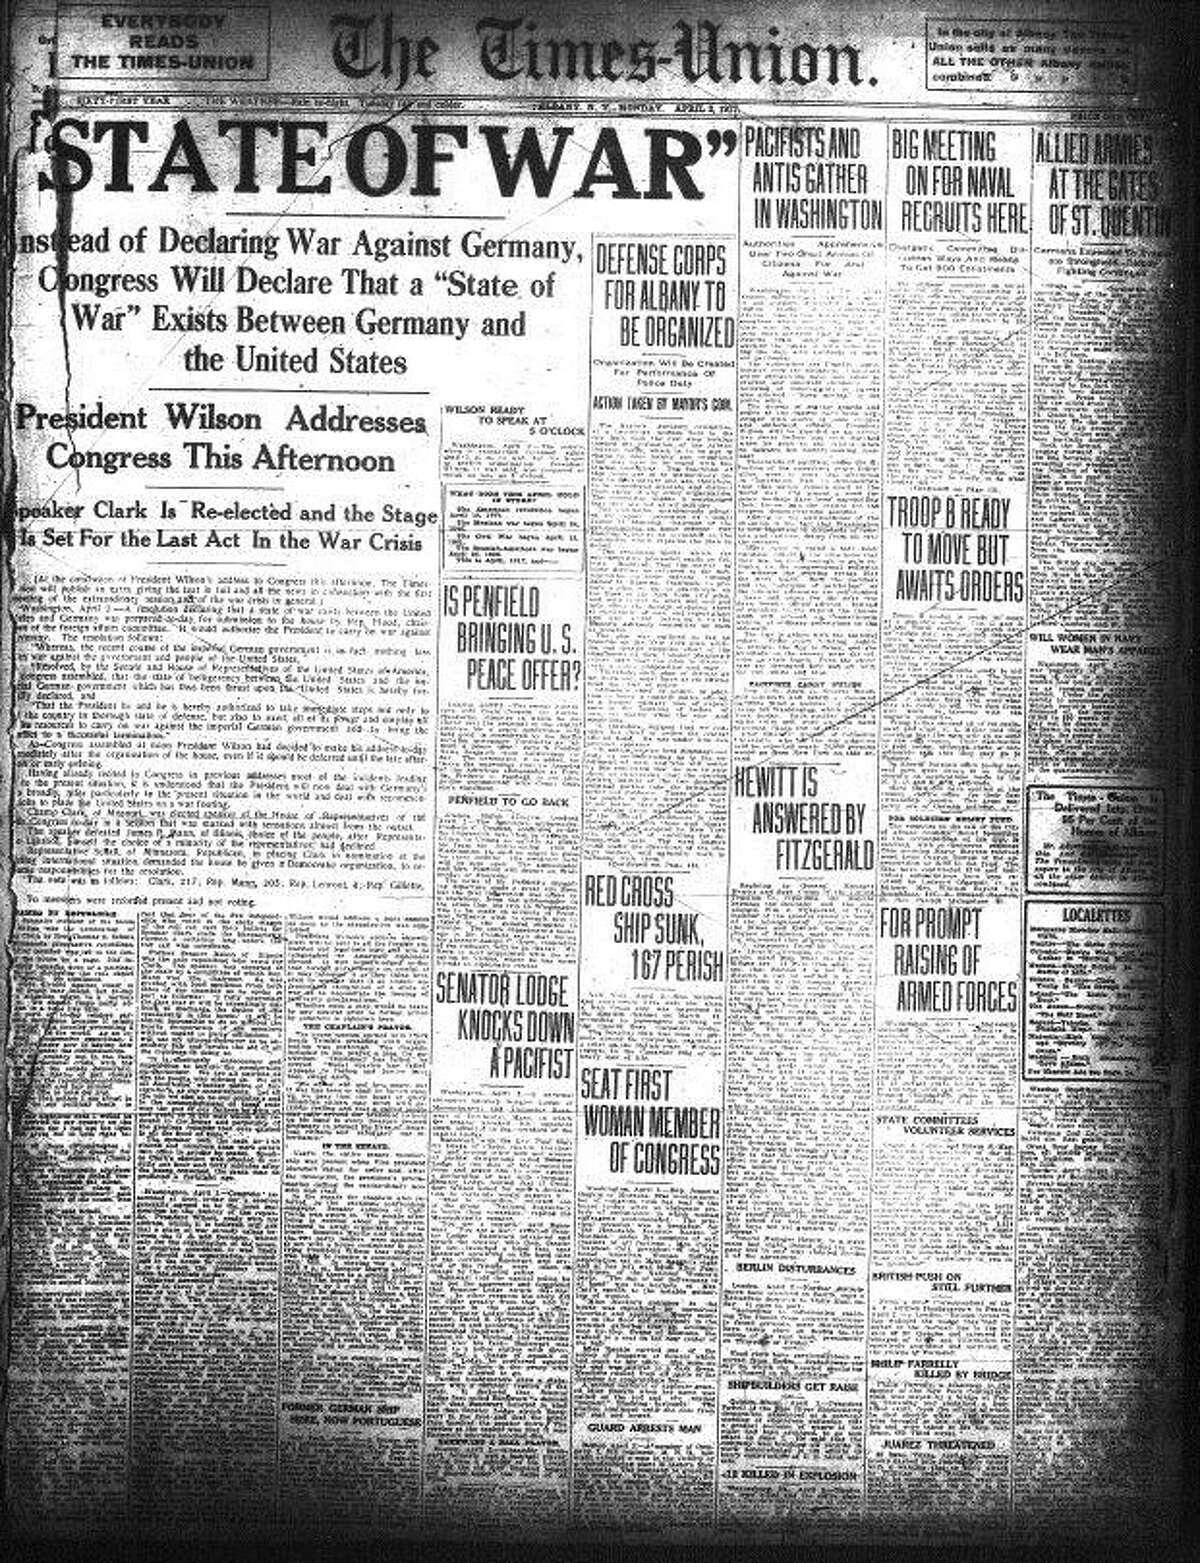 Times Union front page, April 2, 1917, as America entered World War I.